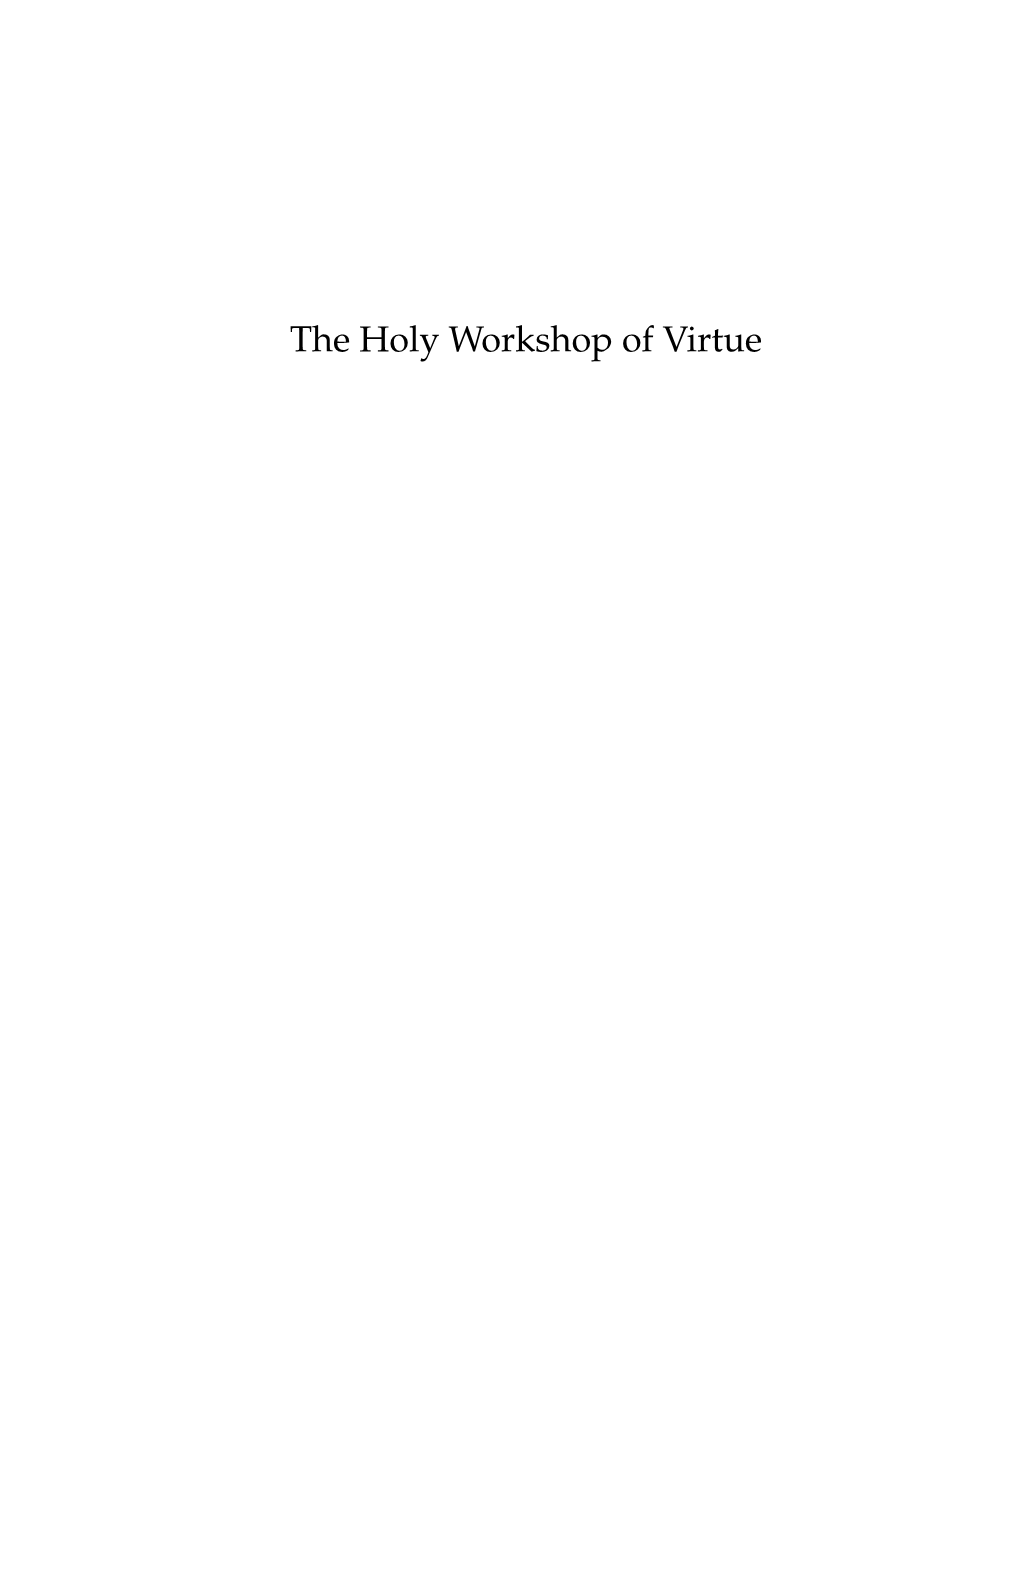 The Holy Workshop of Virtue